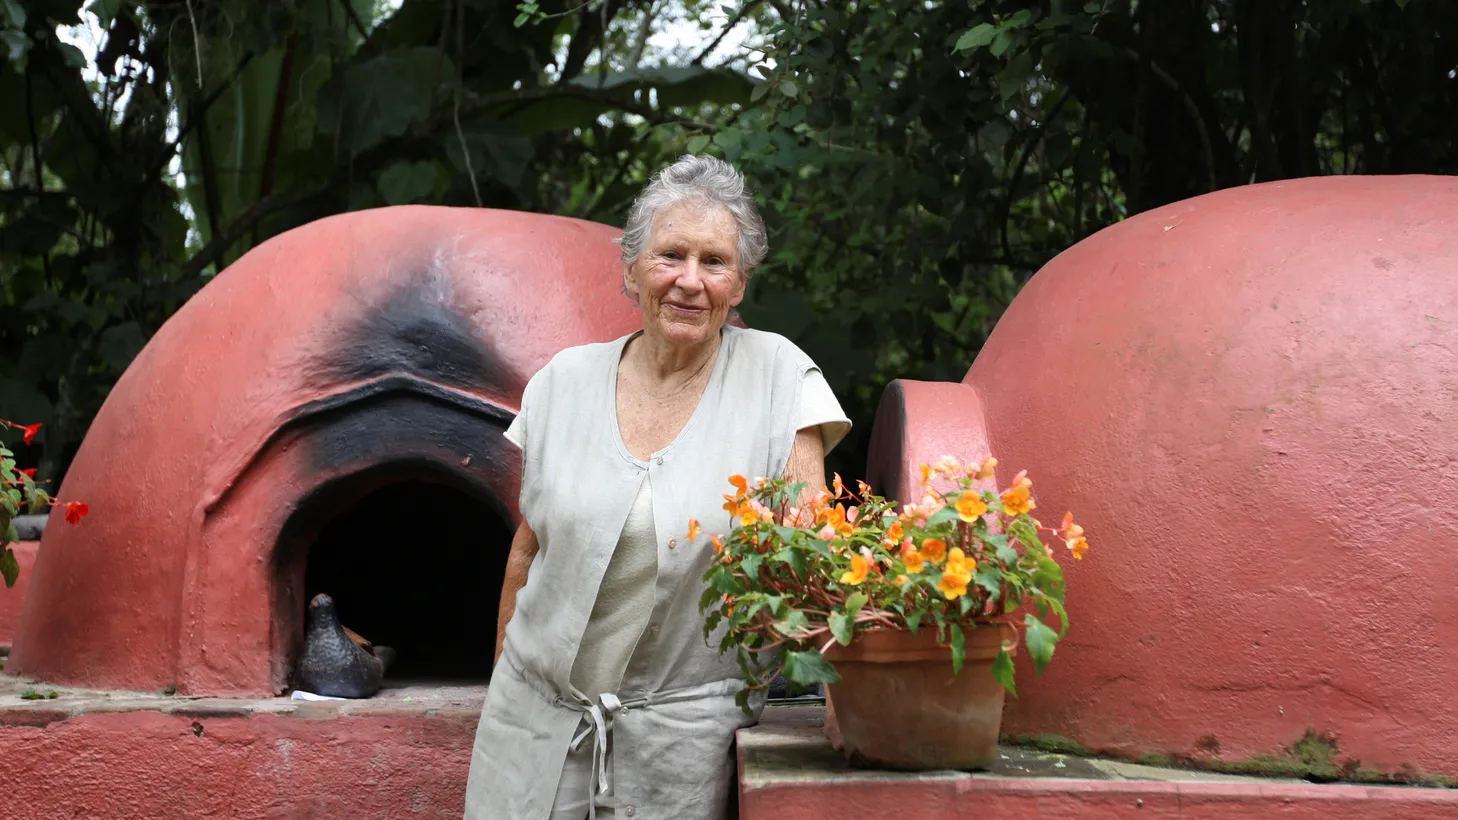 British-born Diana Kennedy smiles as she poses for a picture in front of bread ovens at her house in the city of Zitacuaro in the western state of Michoacan September 12, 2008. Kennedy has left behind the bland flavors of her homeland to become the world authority on a bewildering array of Mexican recipes from corn fungus crepes to blood sausage tacos. Now in her 80s, Kennedy is a cook's cook who was decorated with the Order of the Aztec Eagle, the highest honor given to foreigners in Mexico for her work traveling around the country garnering recipes and cataloging them in her cookbooks.